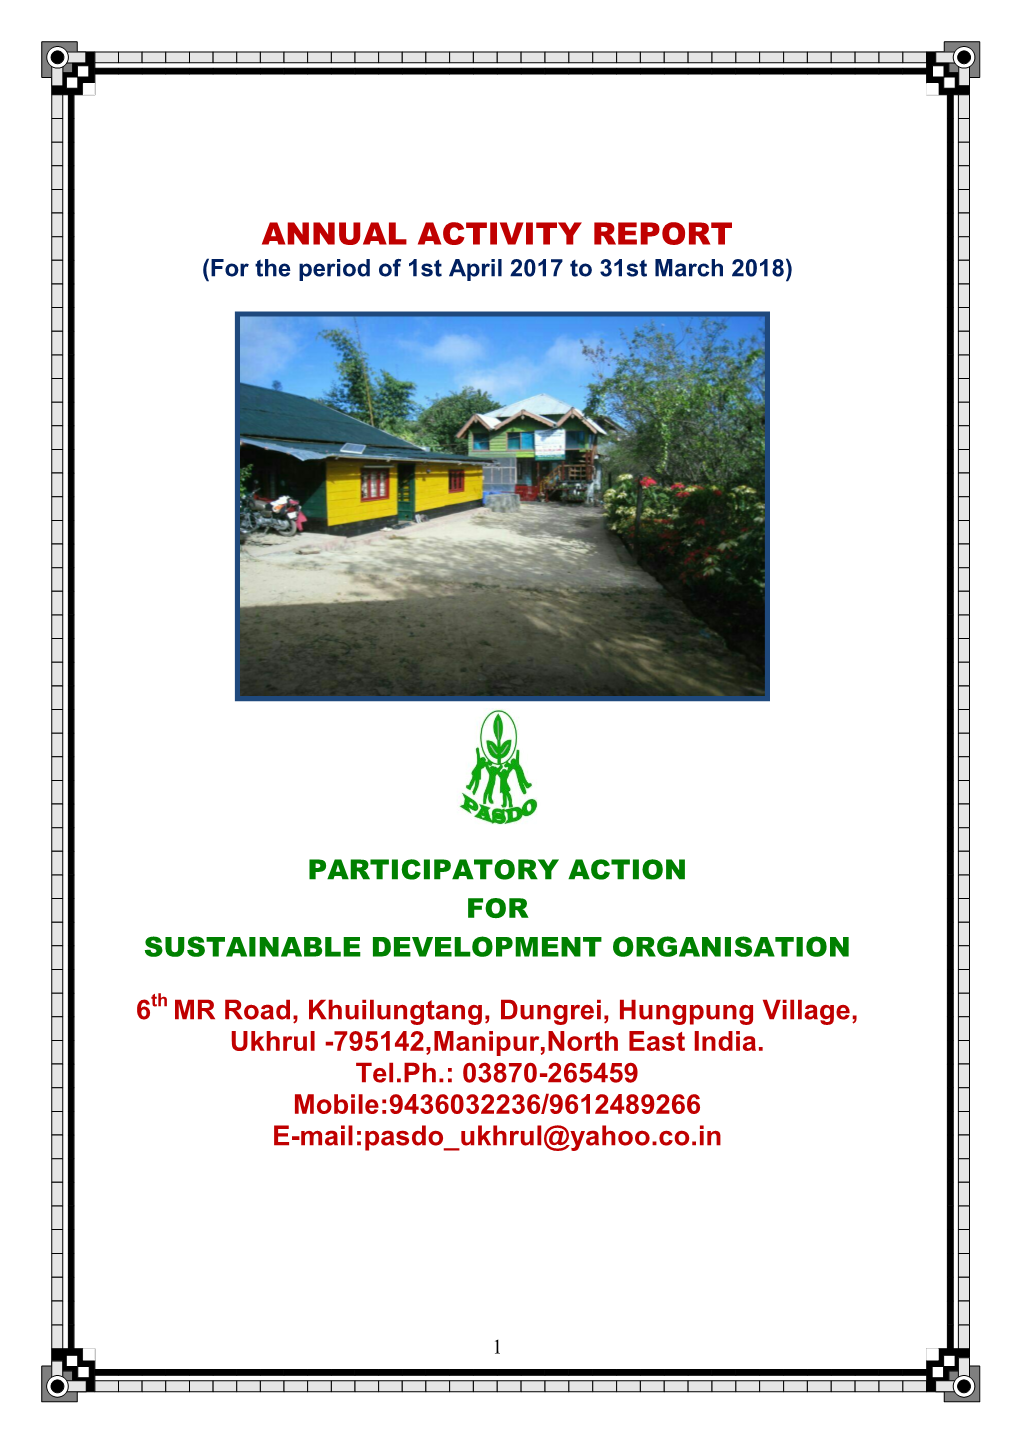 ANNUAL ACTIVITY REPORT (For the Period of 1St April 2017 to 31St March 2018)